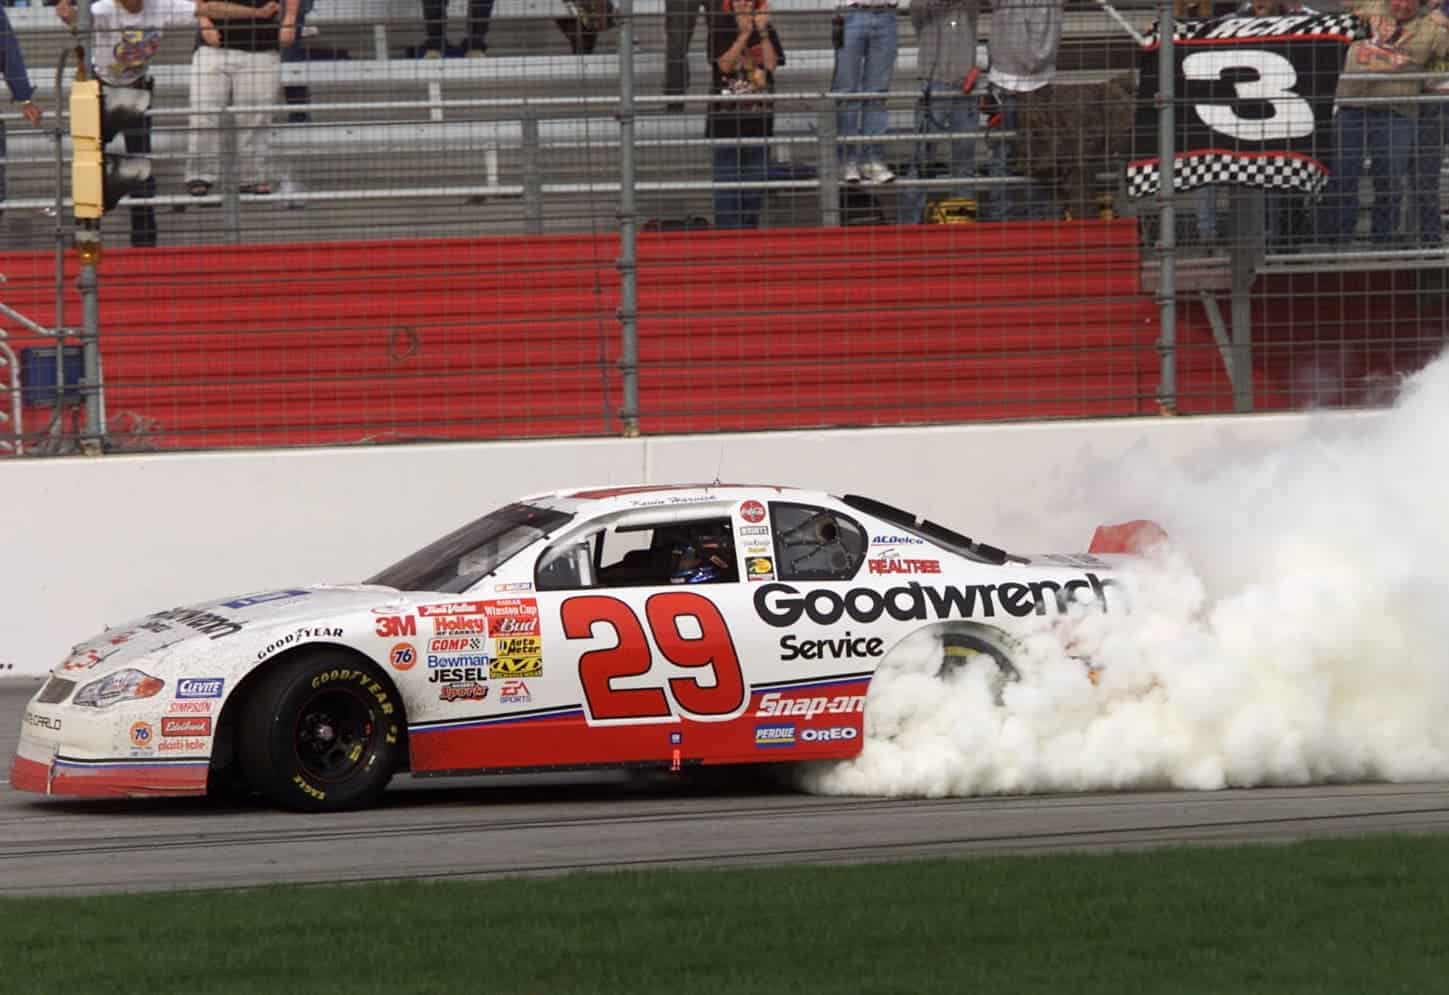 Kevin Harvick in the No. 29 Richard Childress Racing Chevrolet celebrates after winning the 2001 Cracker Barrel 500. | Jonathan Ferrey/ALLSPORT via Getty Images